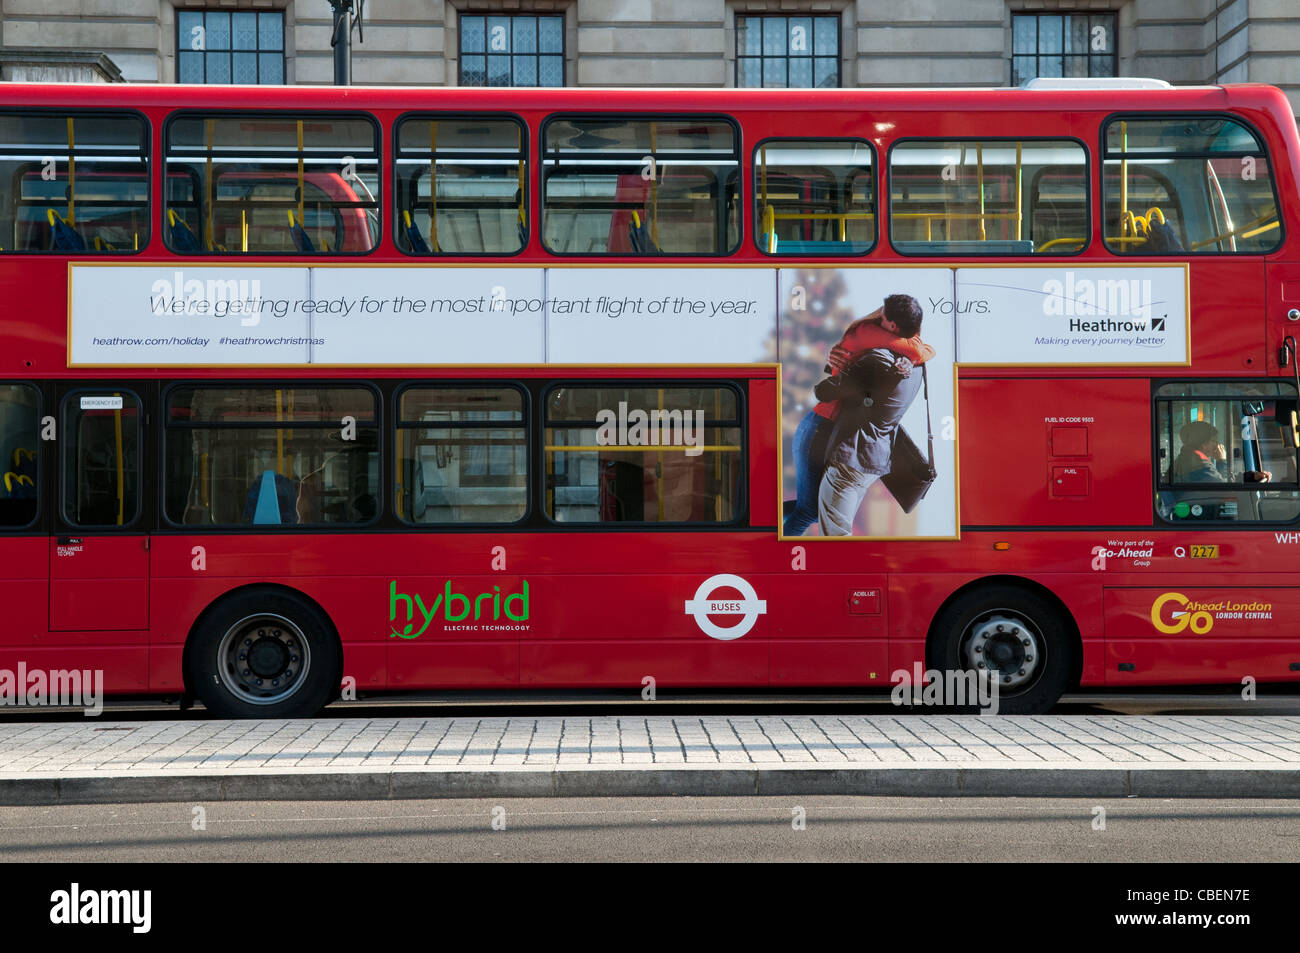 London Bus, Whitehall, Londres, Angleterre, RU Banque D'Images